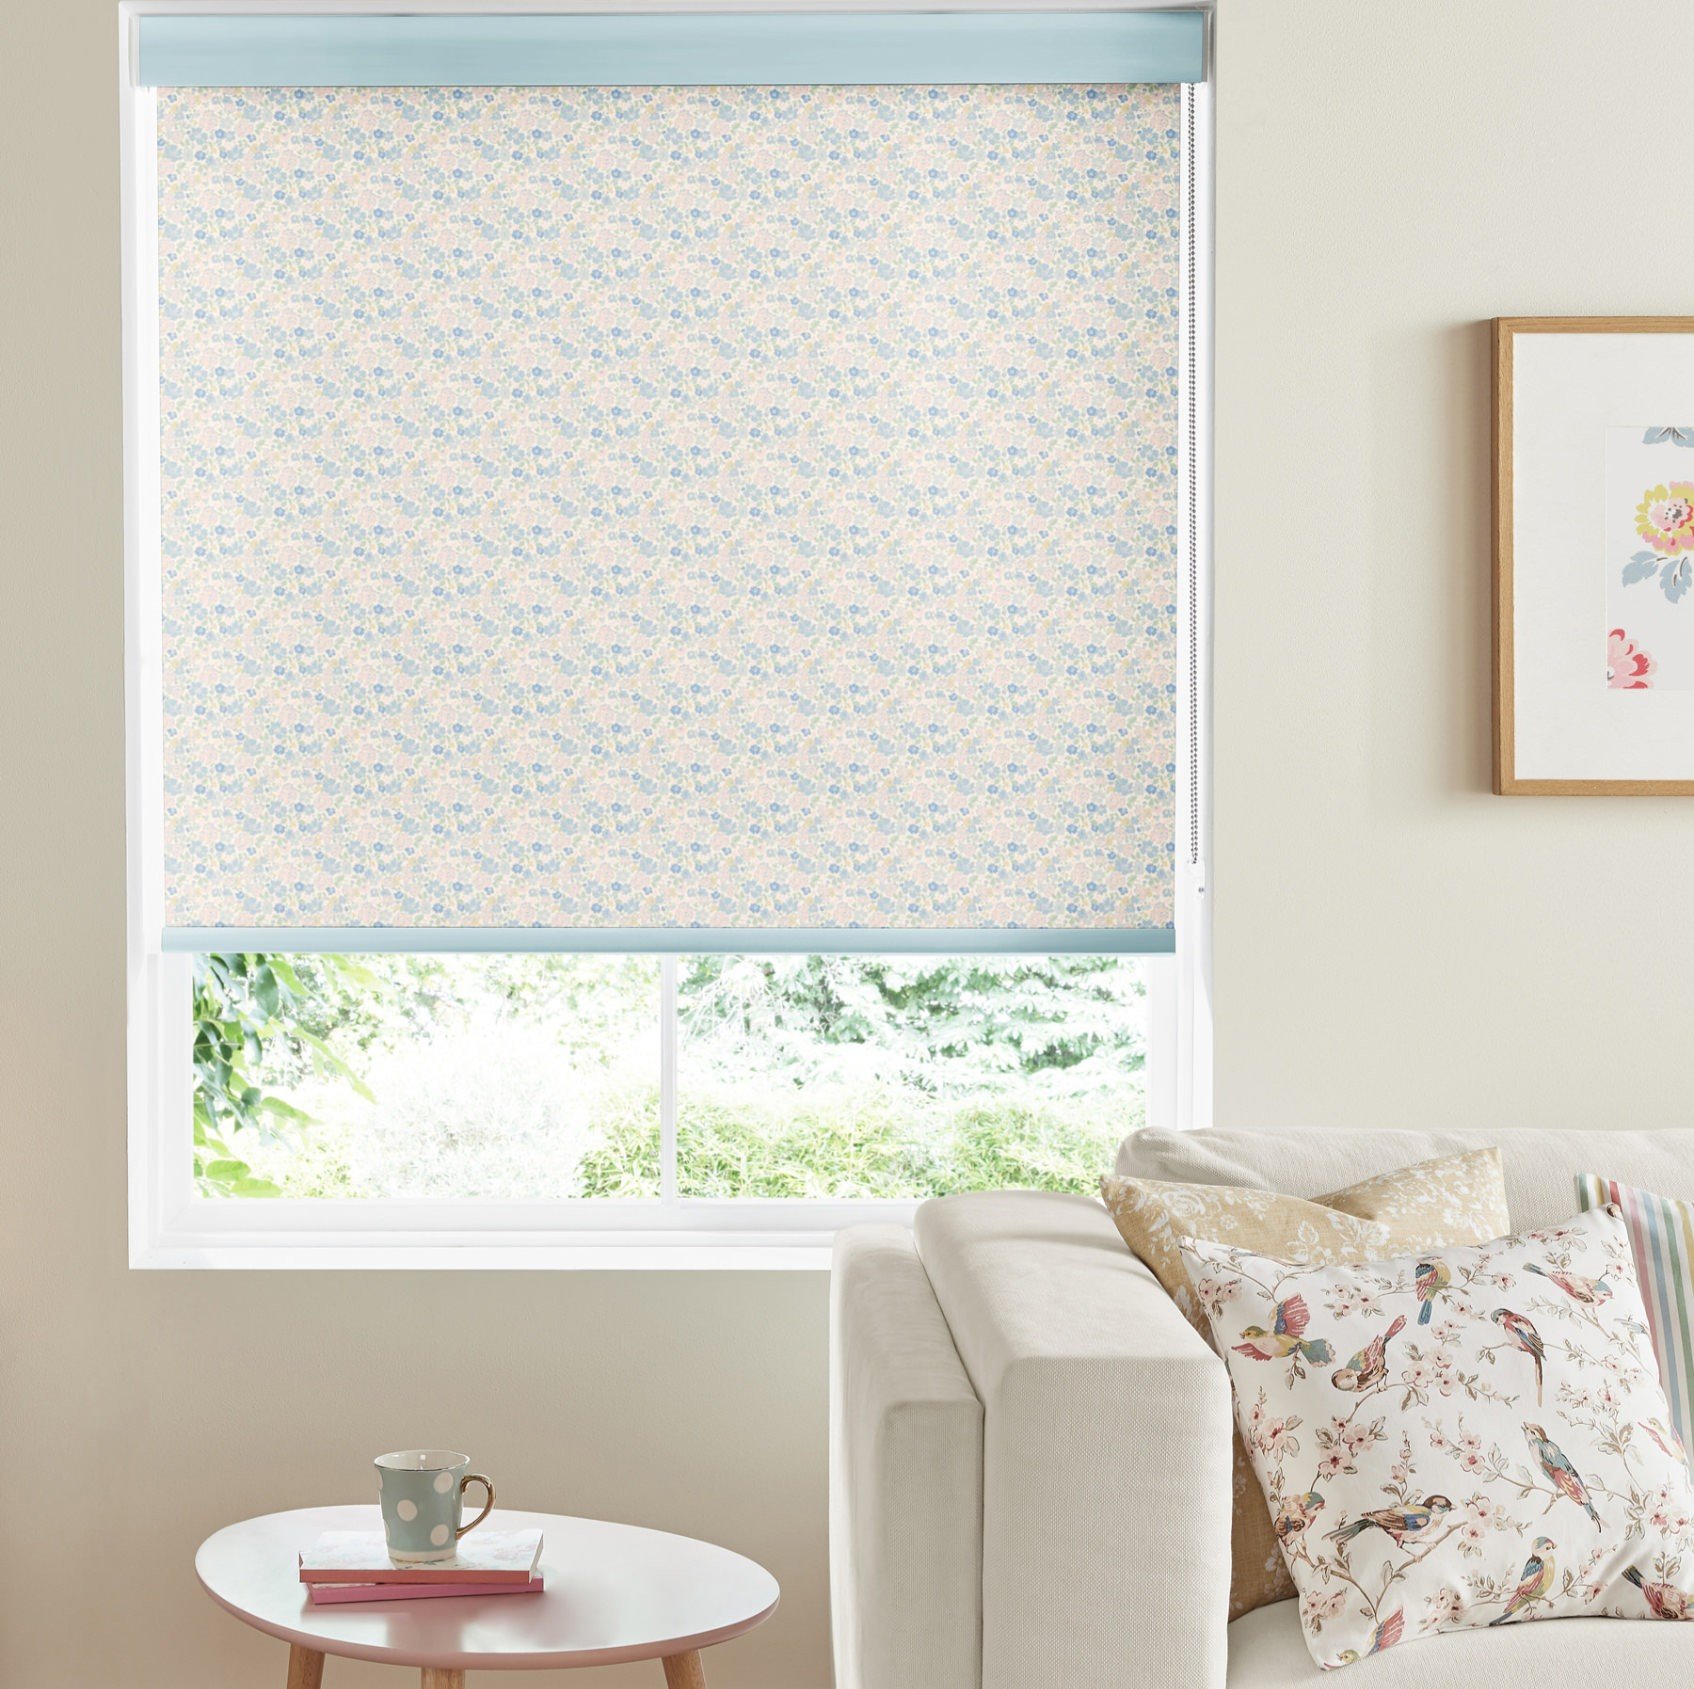 Cath Kidston Mews Ditsy Pastel Dimout Roller Blind